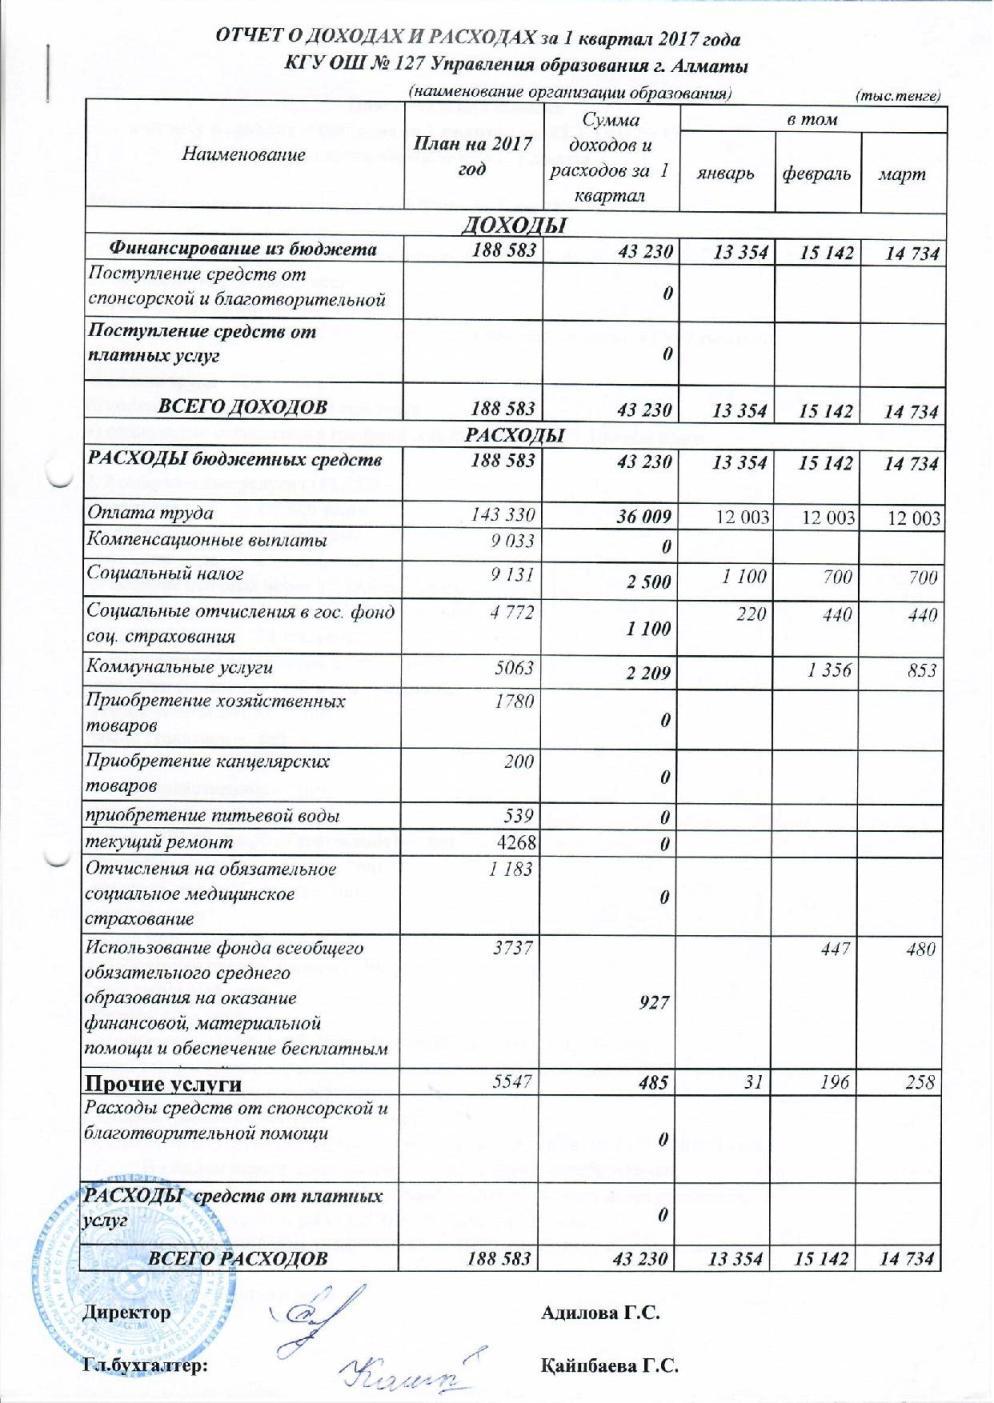 Statement of income and expenses за 1кв 2017г